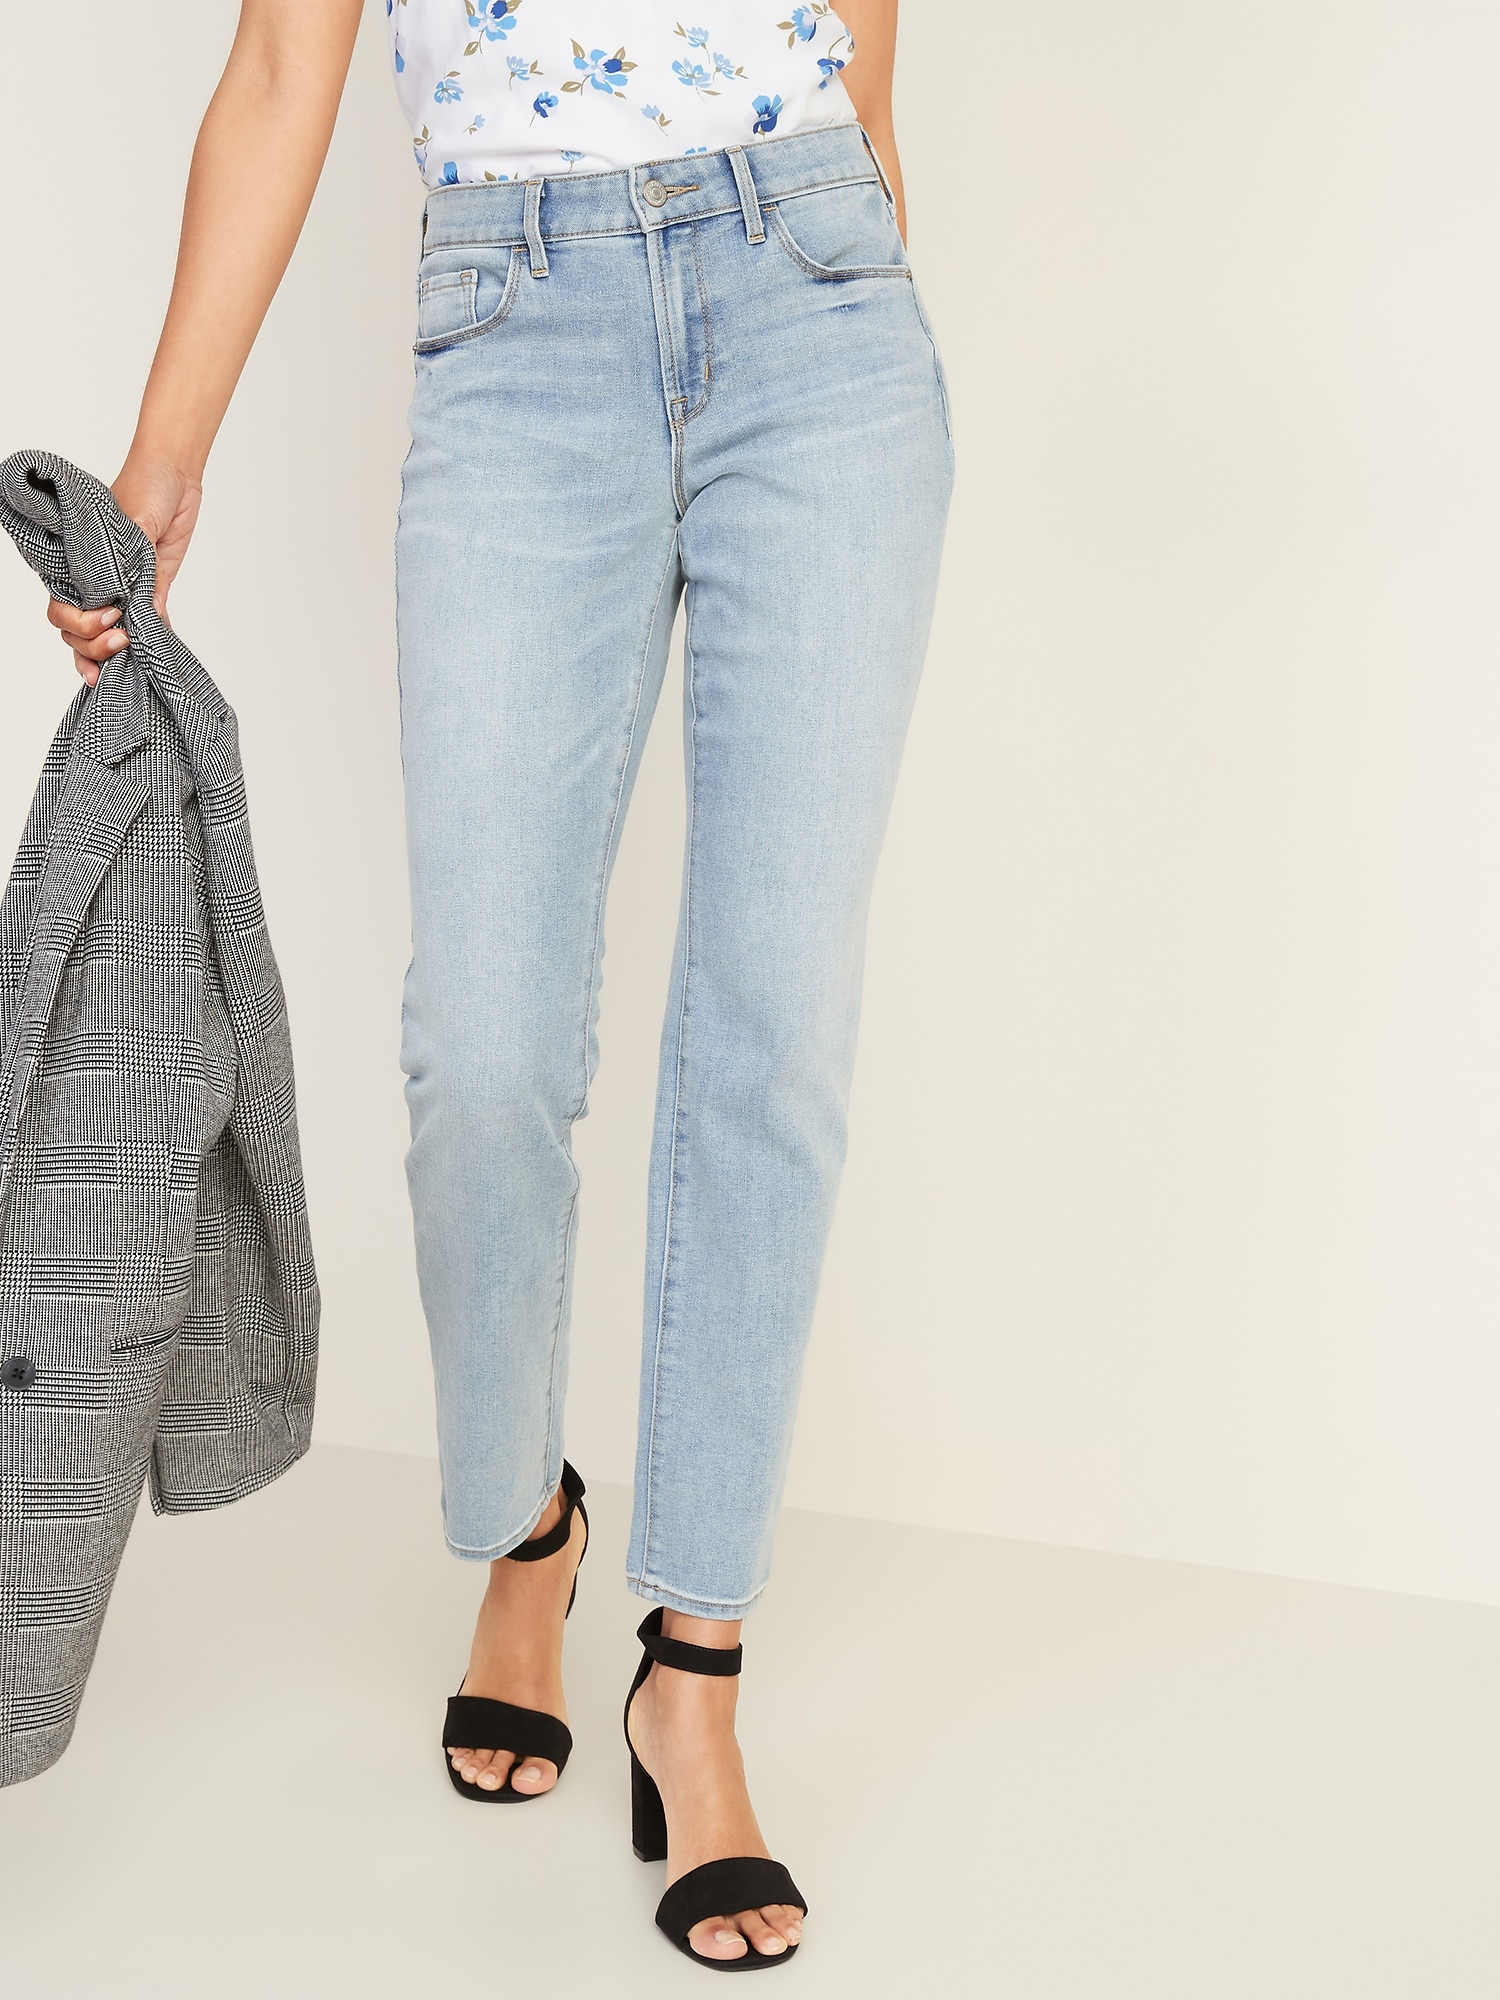 The best jeans for coming days. | Tailored Jeans's BLOG